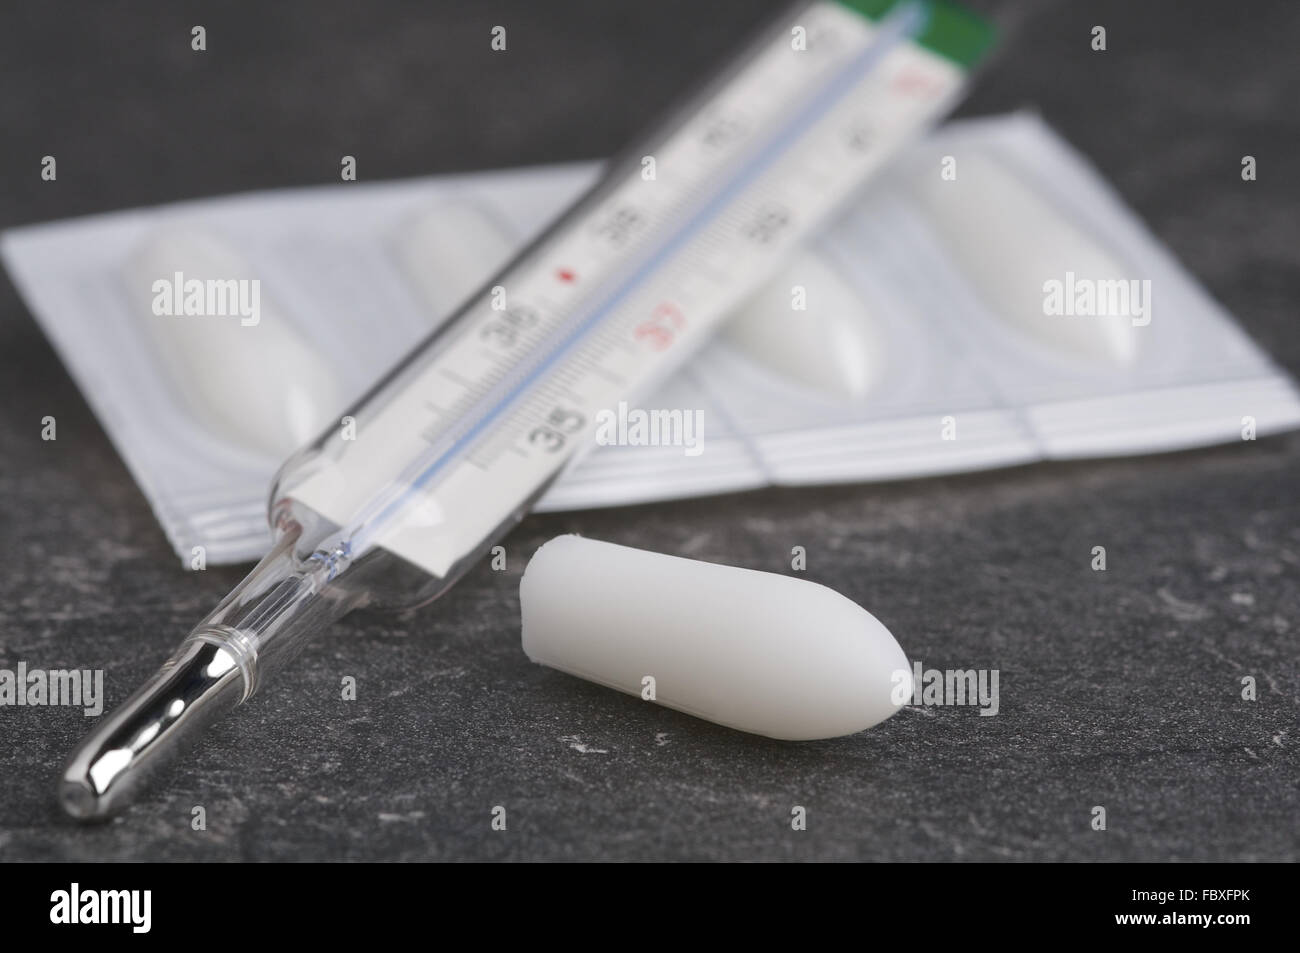 Suppository and Clinical Thermometer Stock Photo